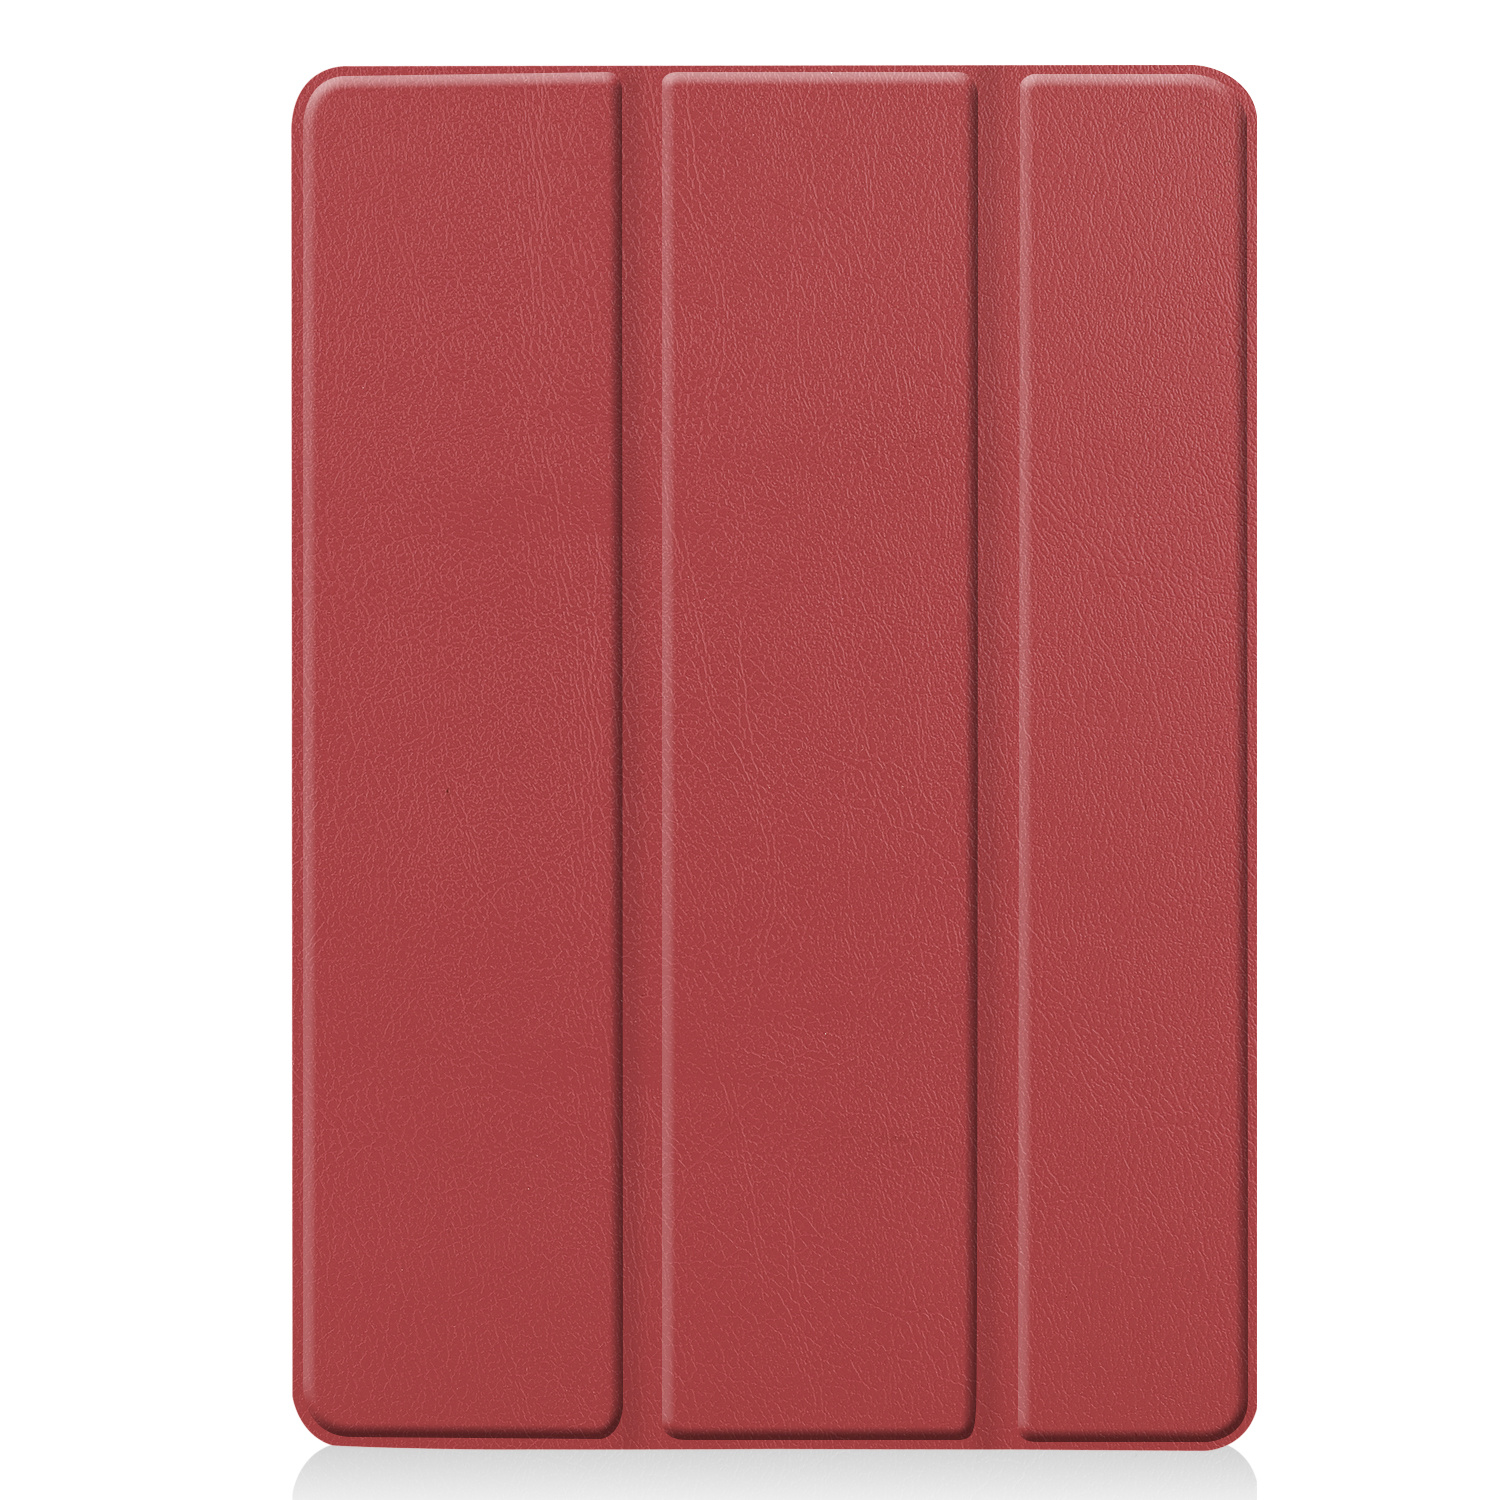 Nomfy iPad 10.2 2020 Hoesje Book Case Hoes - iPad 10.2 2020 Hoes Hardcover Case Hoesje - Donker Rood